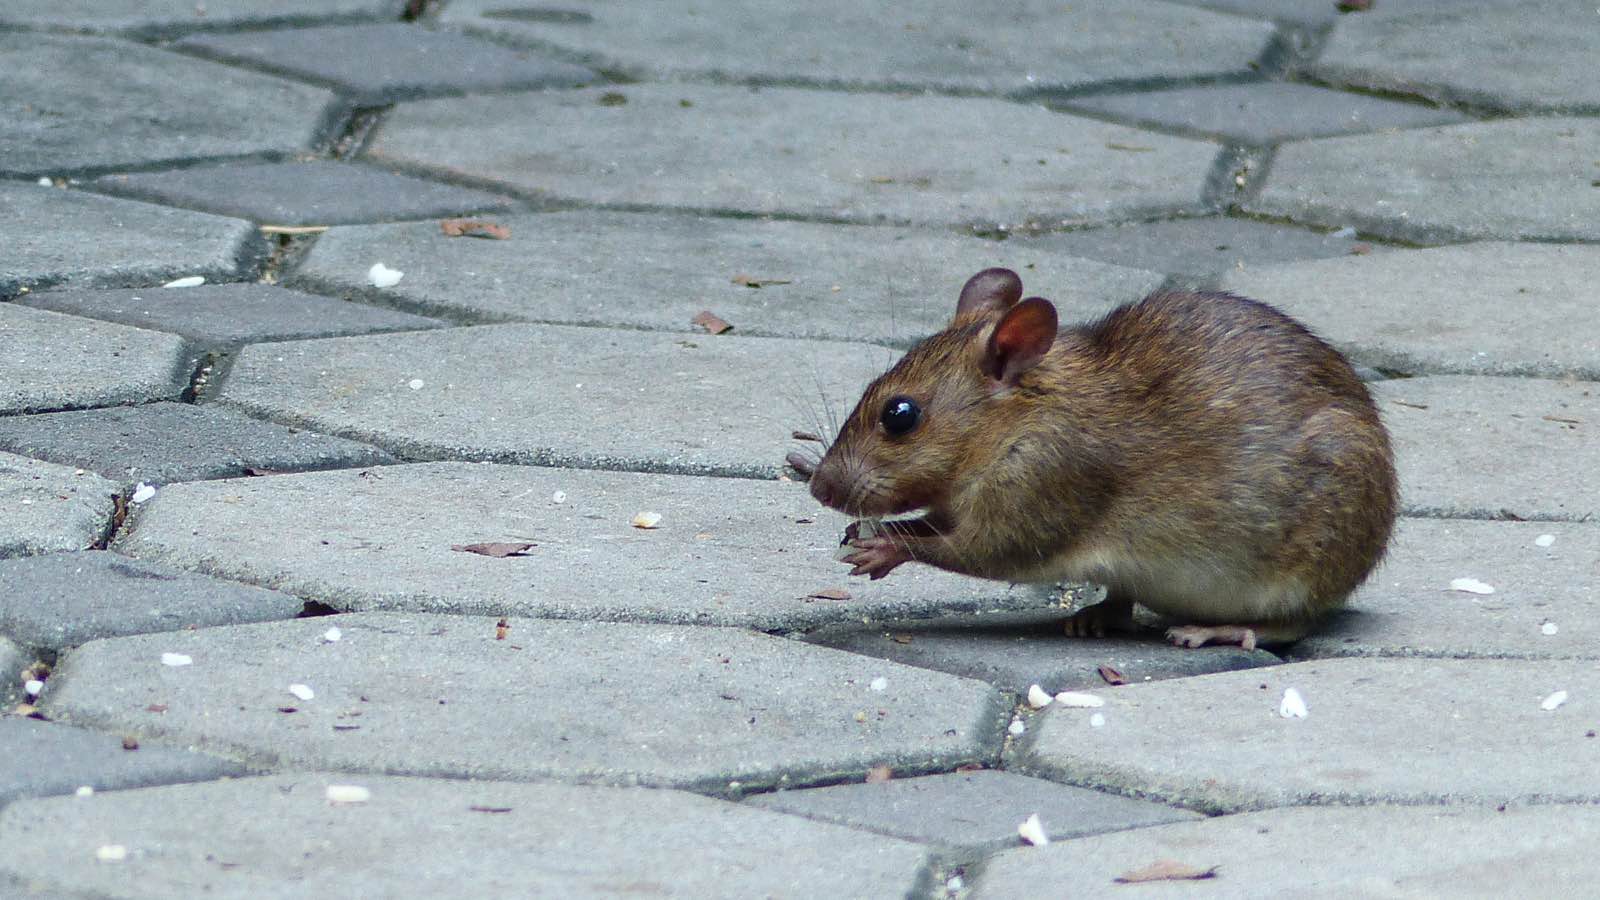 Adult mouse sitting on a sidewalk eating a piece of food